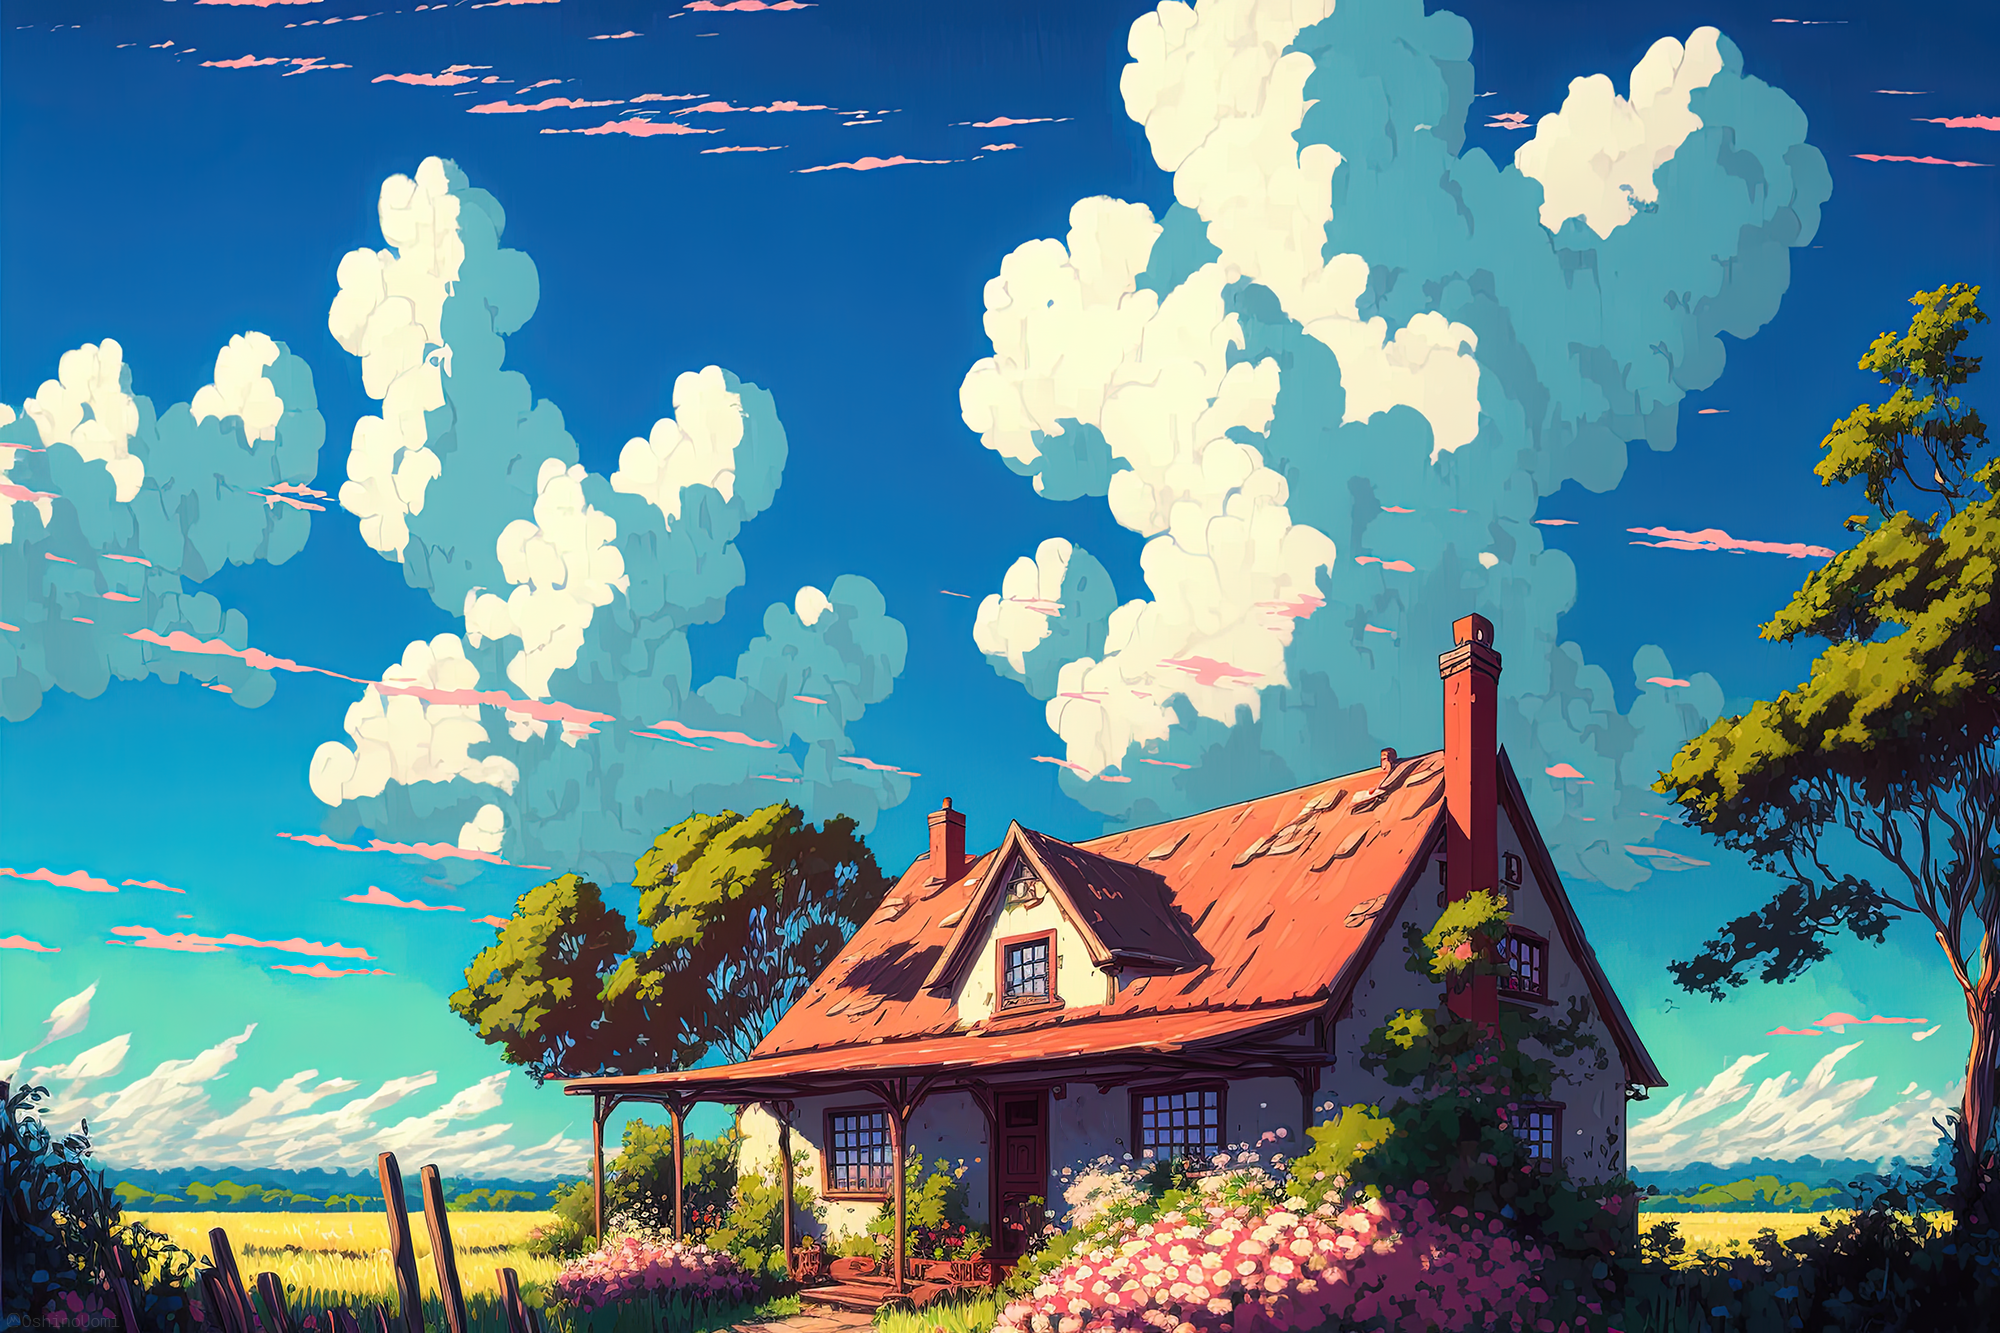 General 2000x1333 Uomi AI art artwork sky house clouds trees flowers